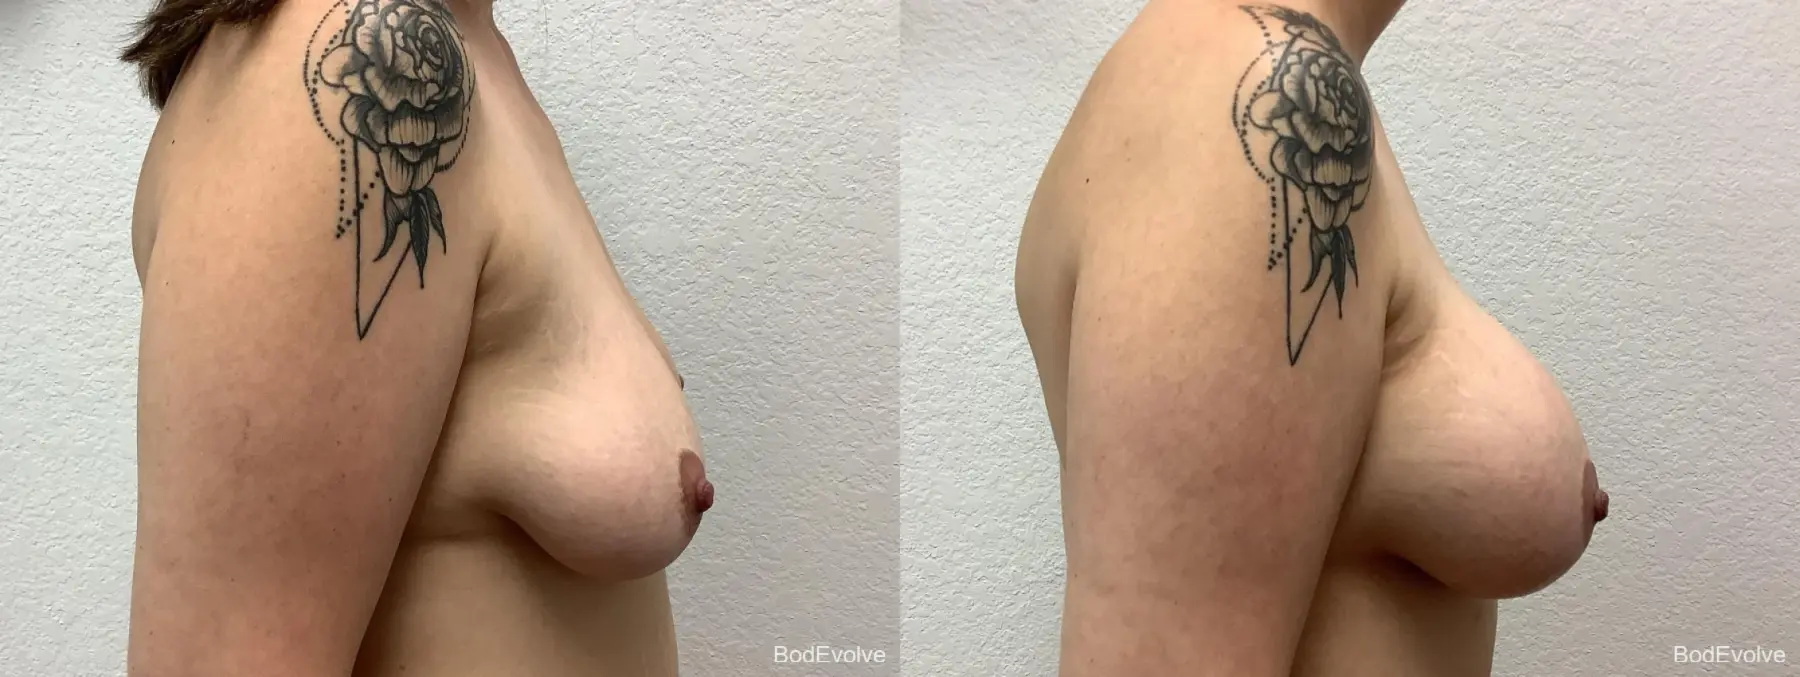 Breast Augmentation: Patient 8 - Before and After 5